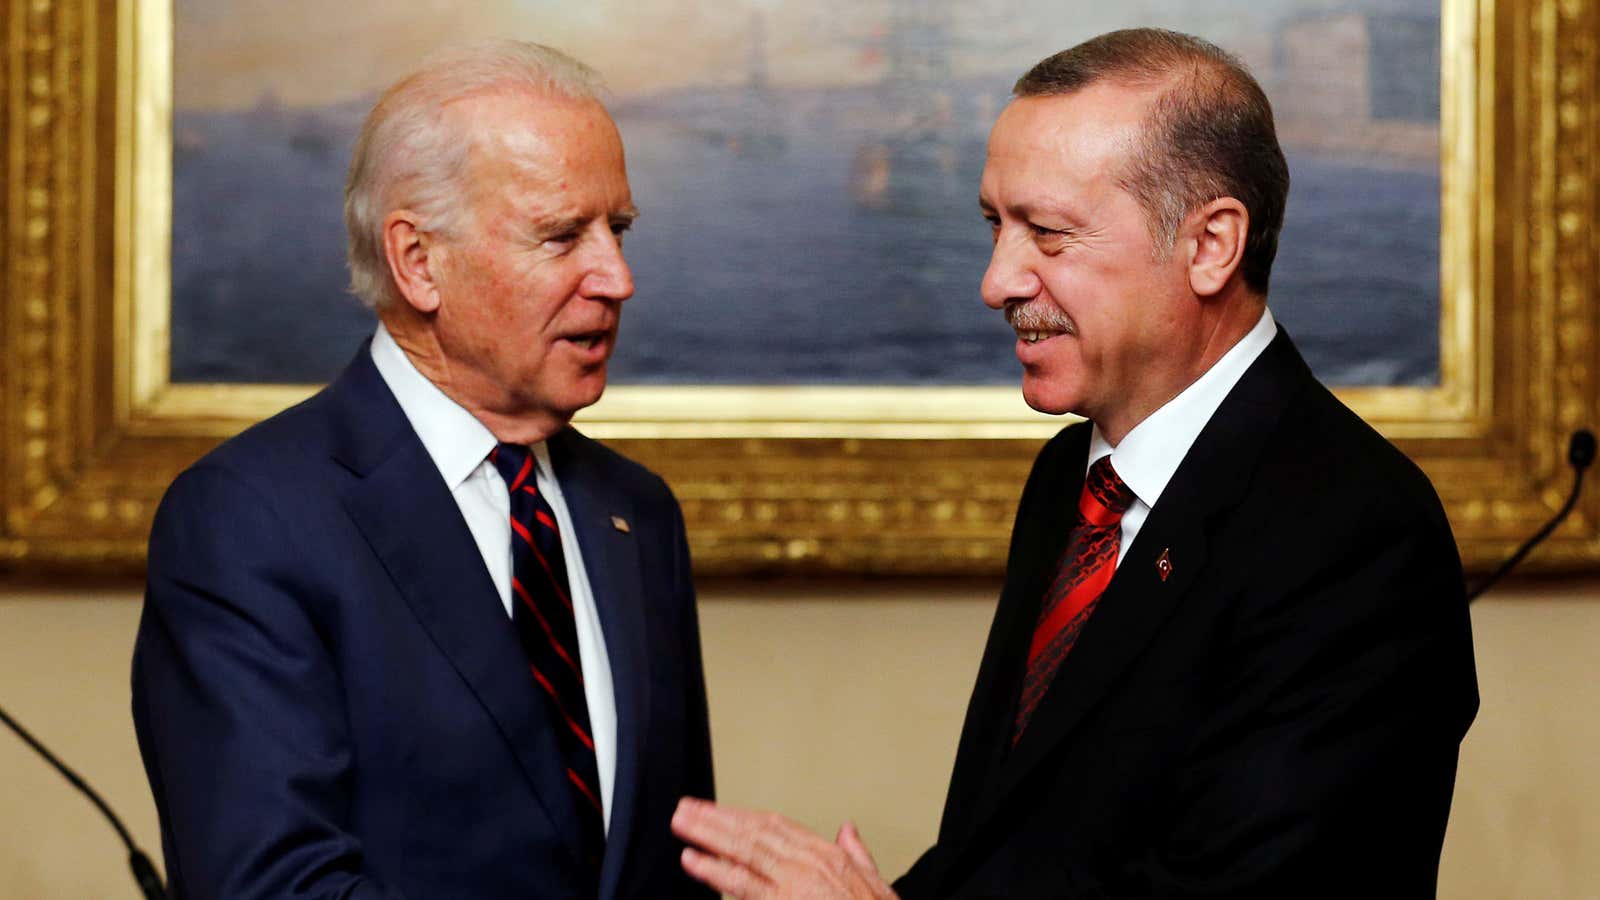 Biden’s long career in US politics means he has deep relationships with many world leaders.